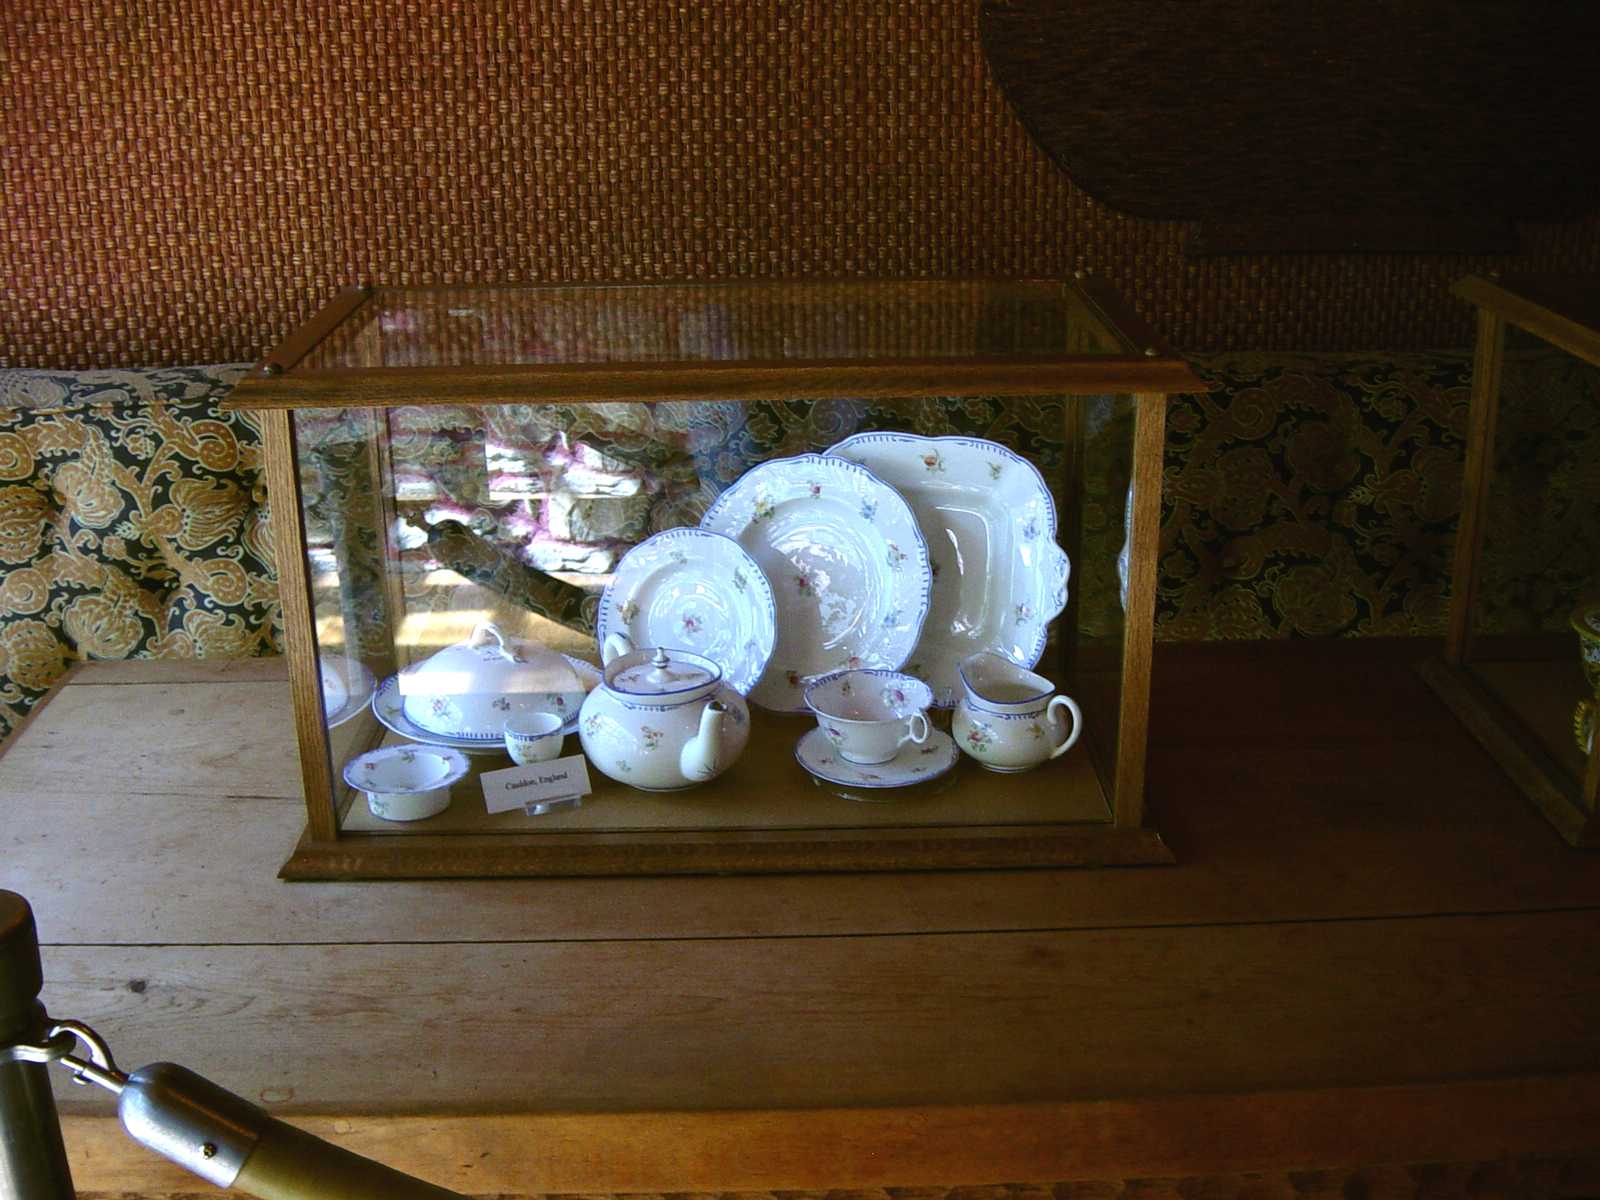 Display of English china in dining room